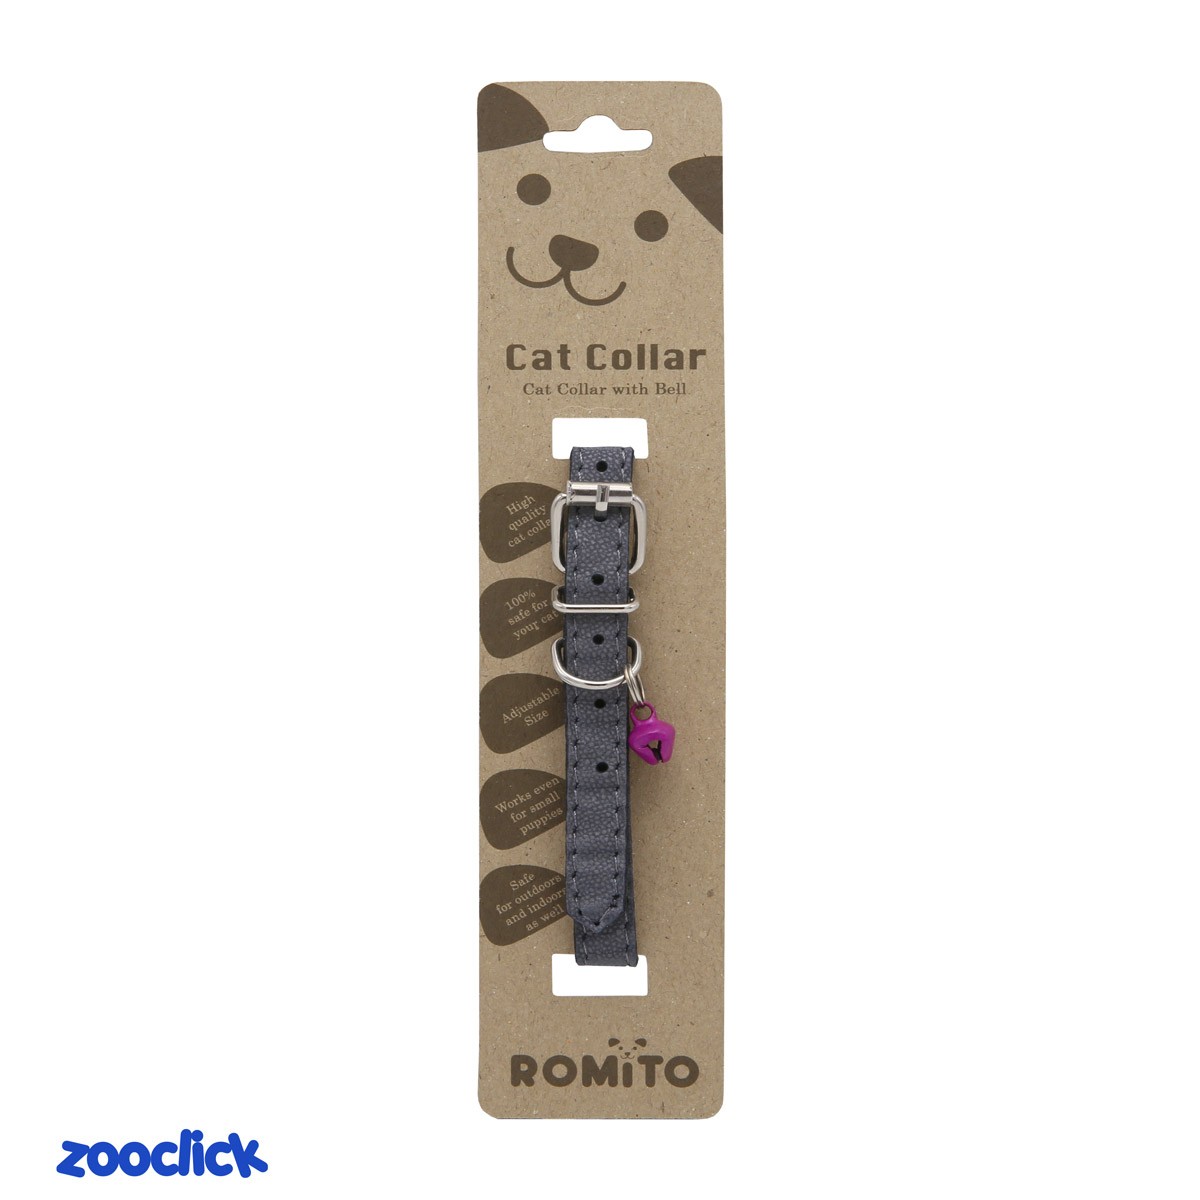 romito dog & rodent collar